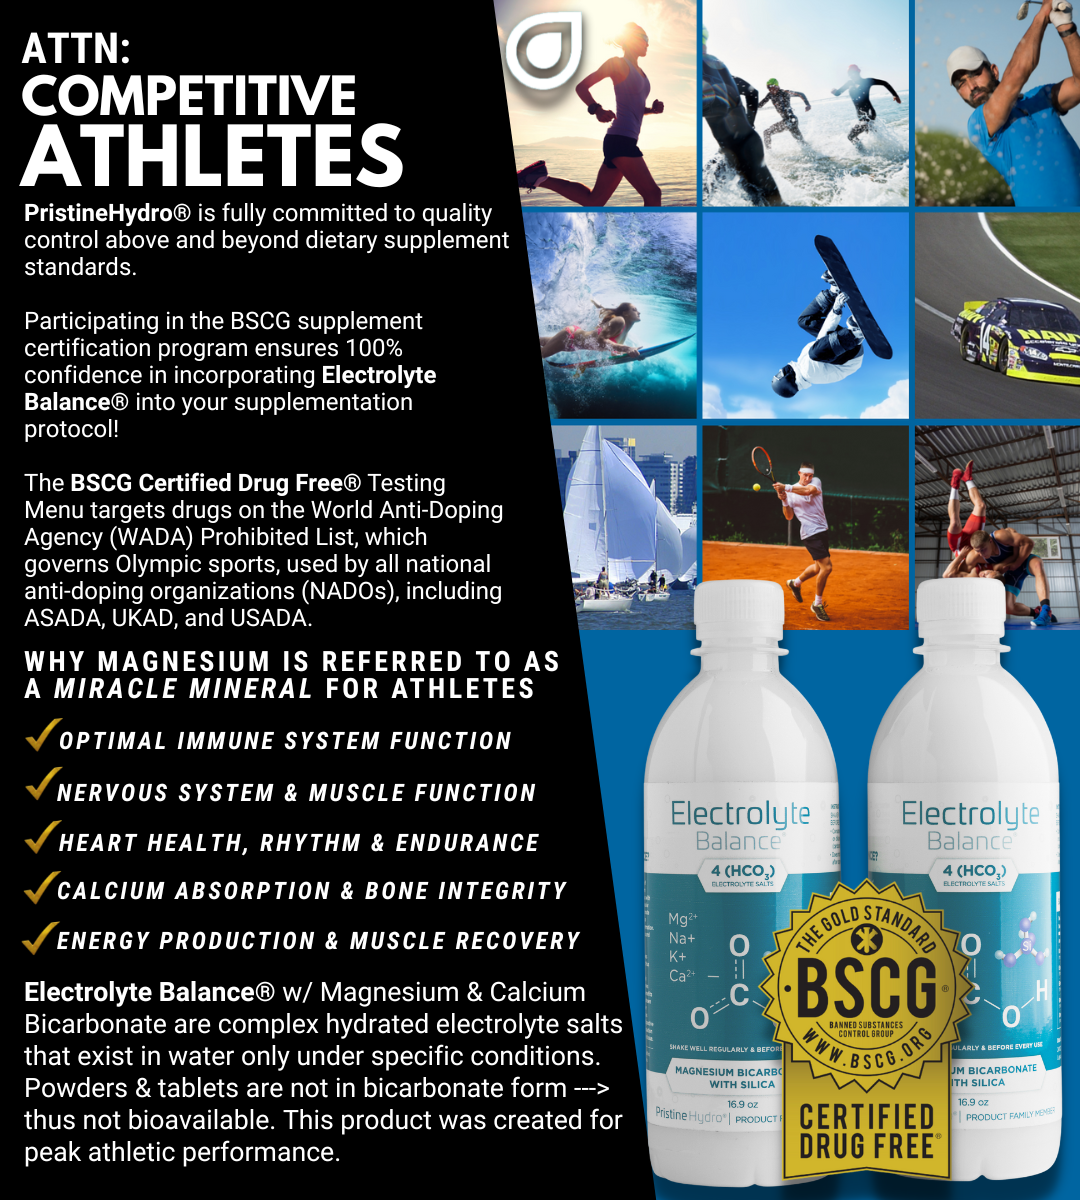 Why Magnesium is considered by many to be the Miracle Mineral for Competitive Athletes - Drink ElectrolyteBalance for Peak Athletic Performance - The Most Bioavailable Form of Magnesium Today!